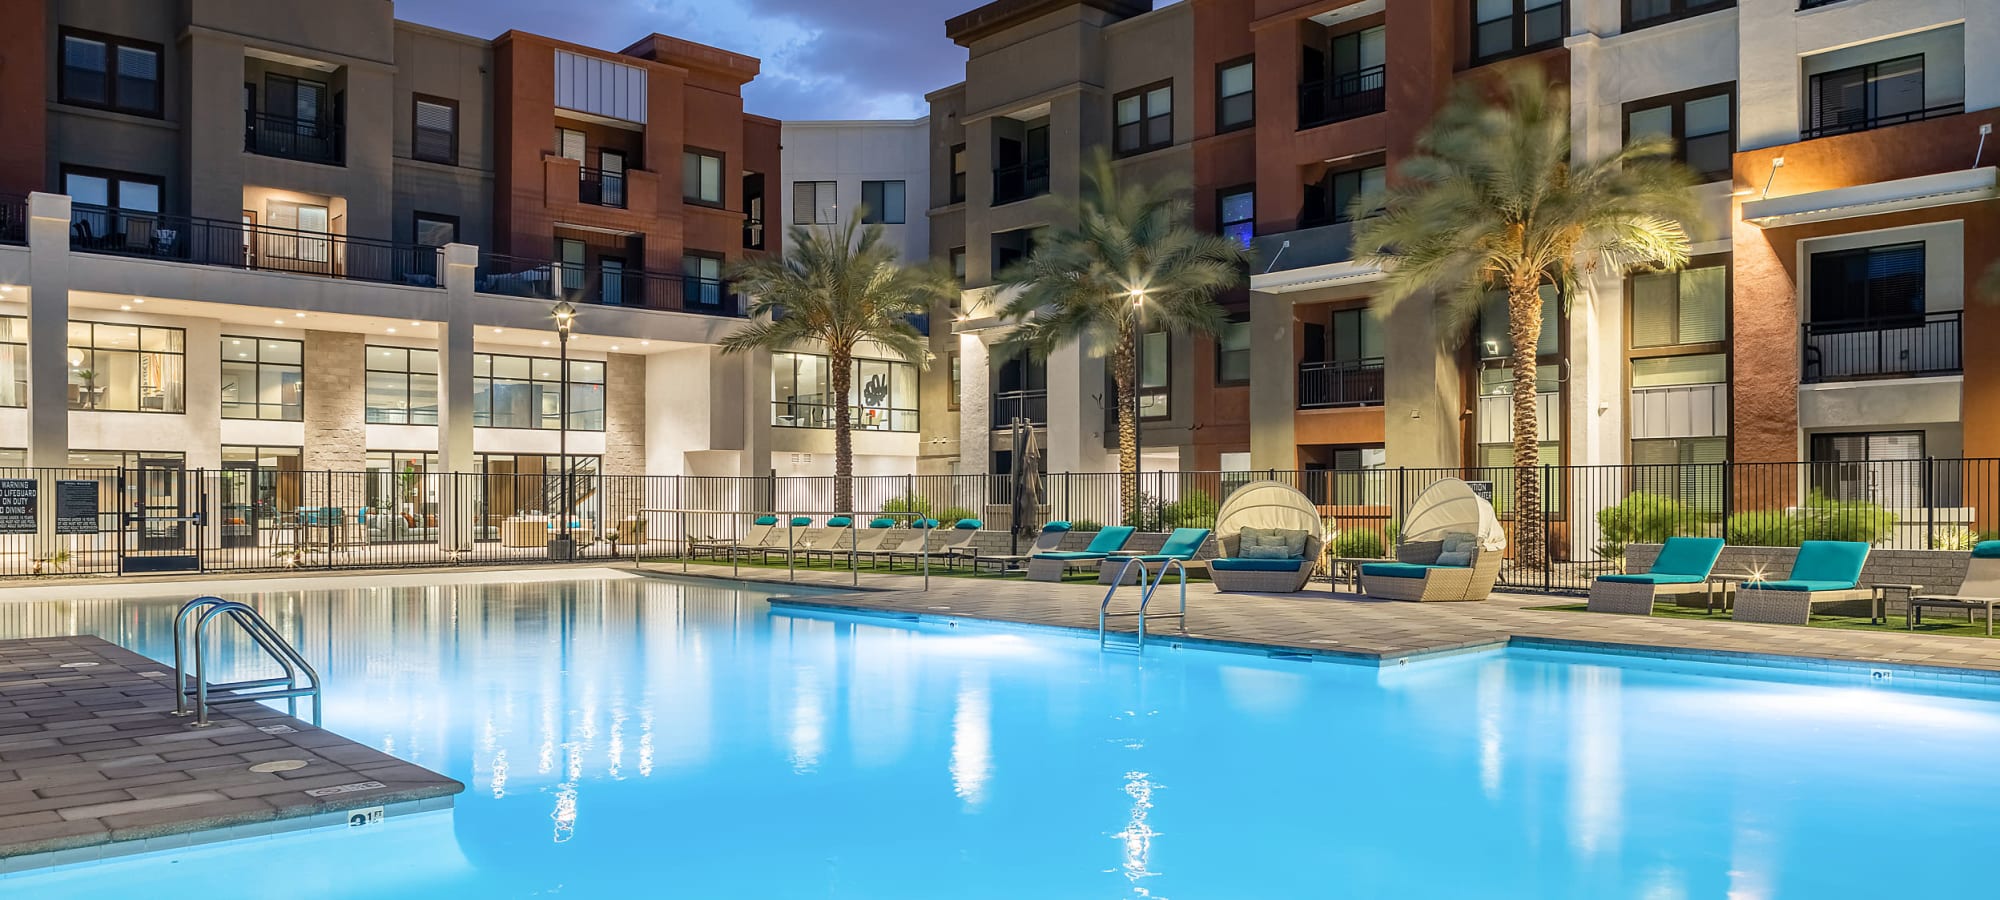 Schedule a tour of Marquis at Chandler in Chandler, Arizona